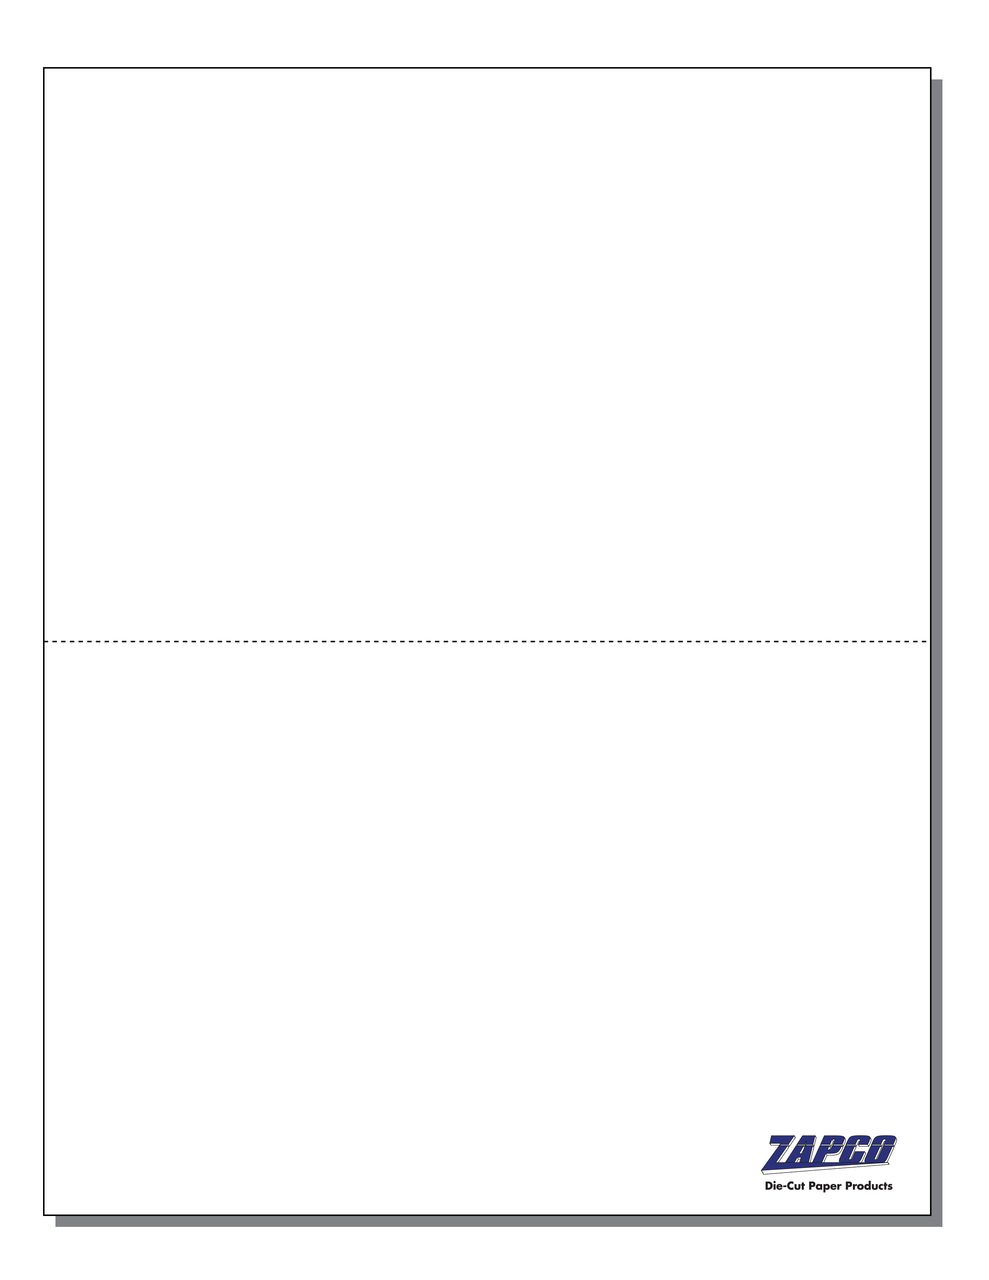 Item 614: 2-Up 5 1/2" x 8 1/2" Post Card with Perf 8 1/2" x 11" Sheet